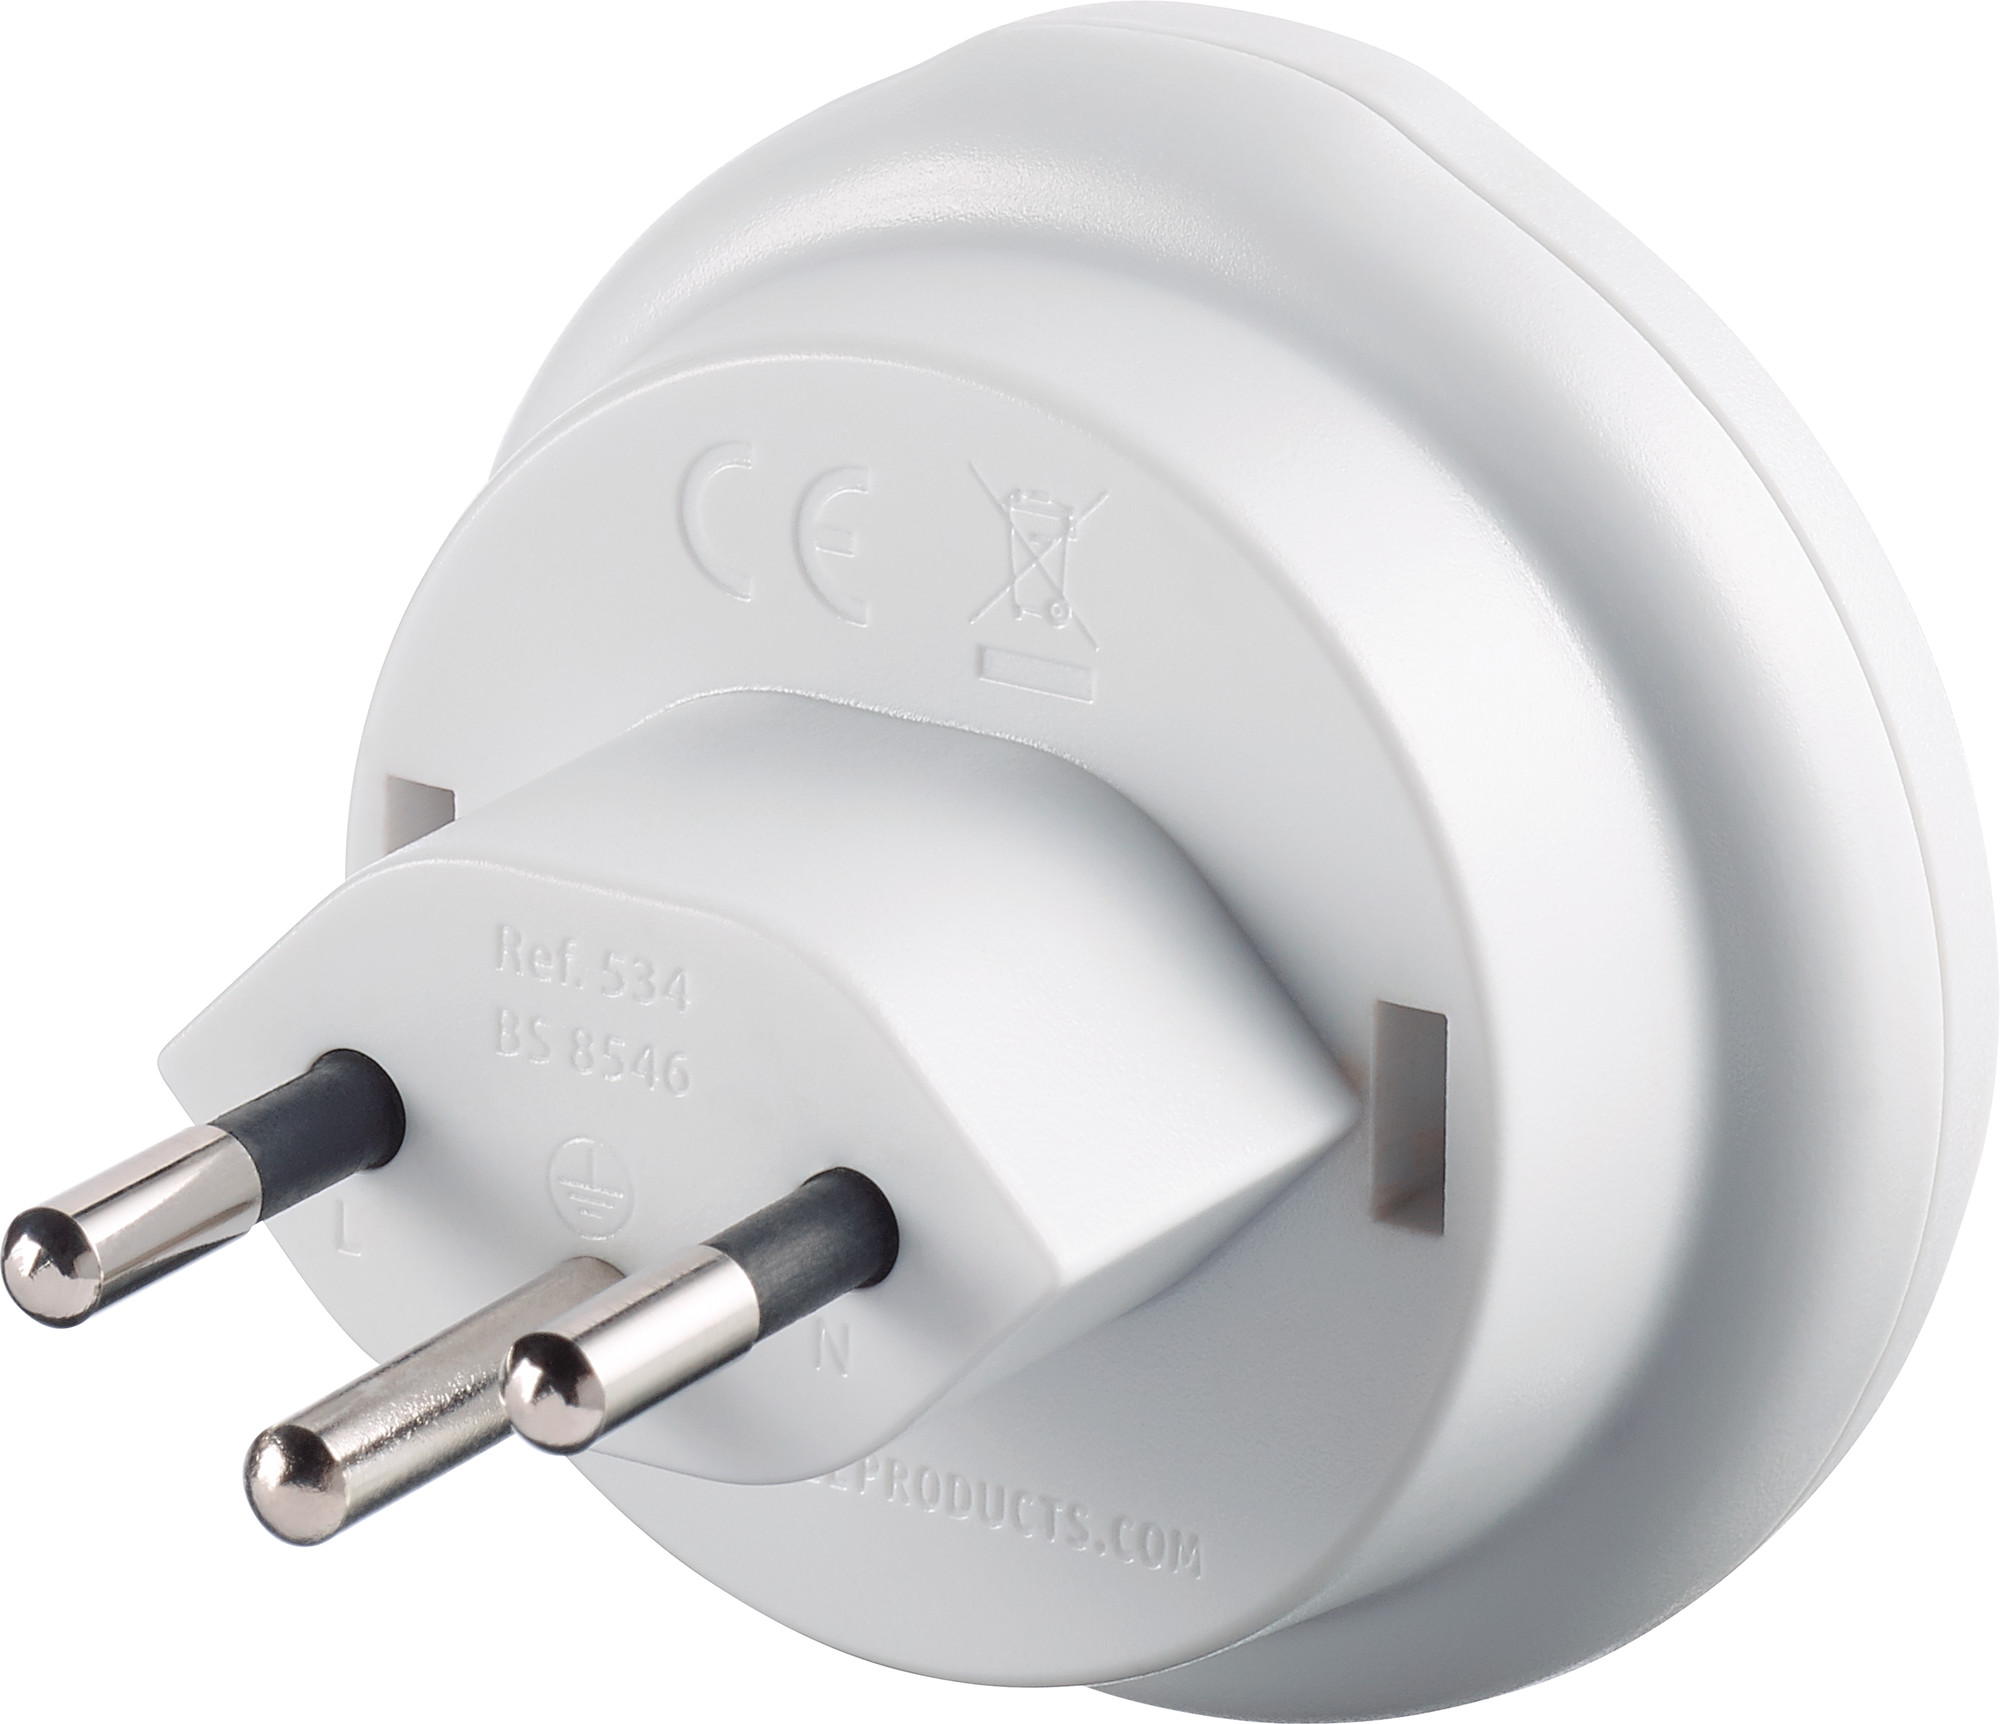 Picture of Go Travel UK Swiss Adapter